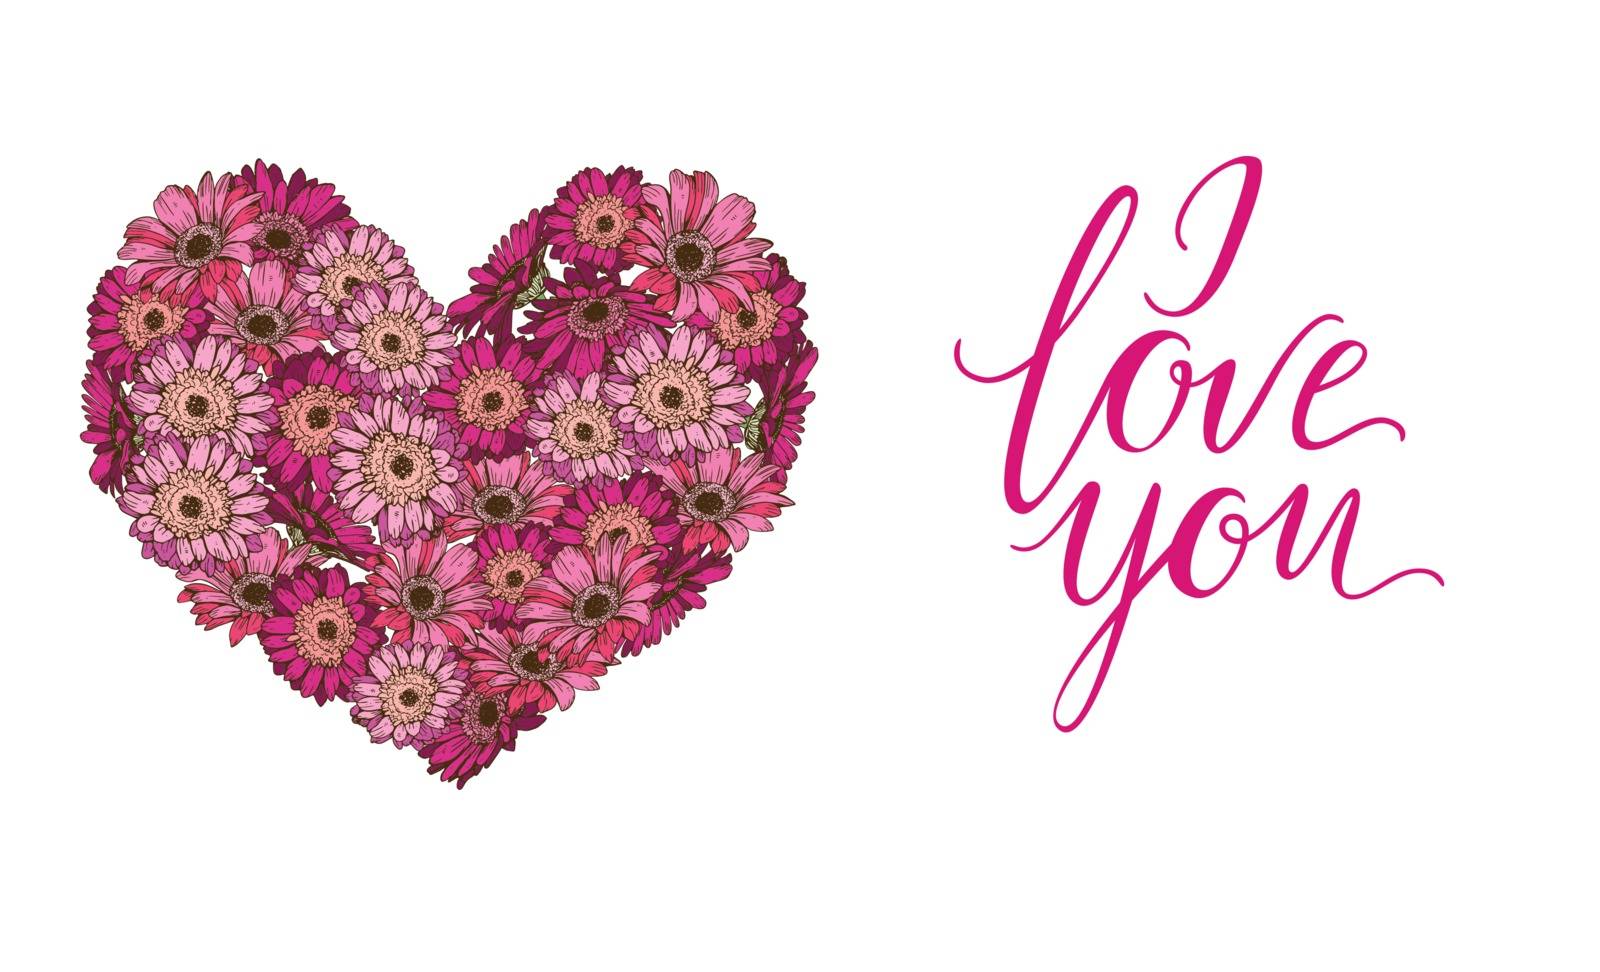 Heart of pink and violet daisies flowers and lettering I LOVE YOU. Vector